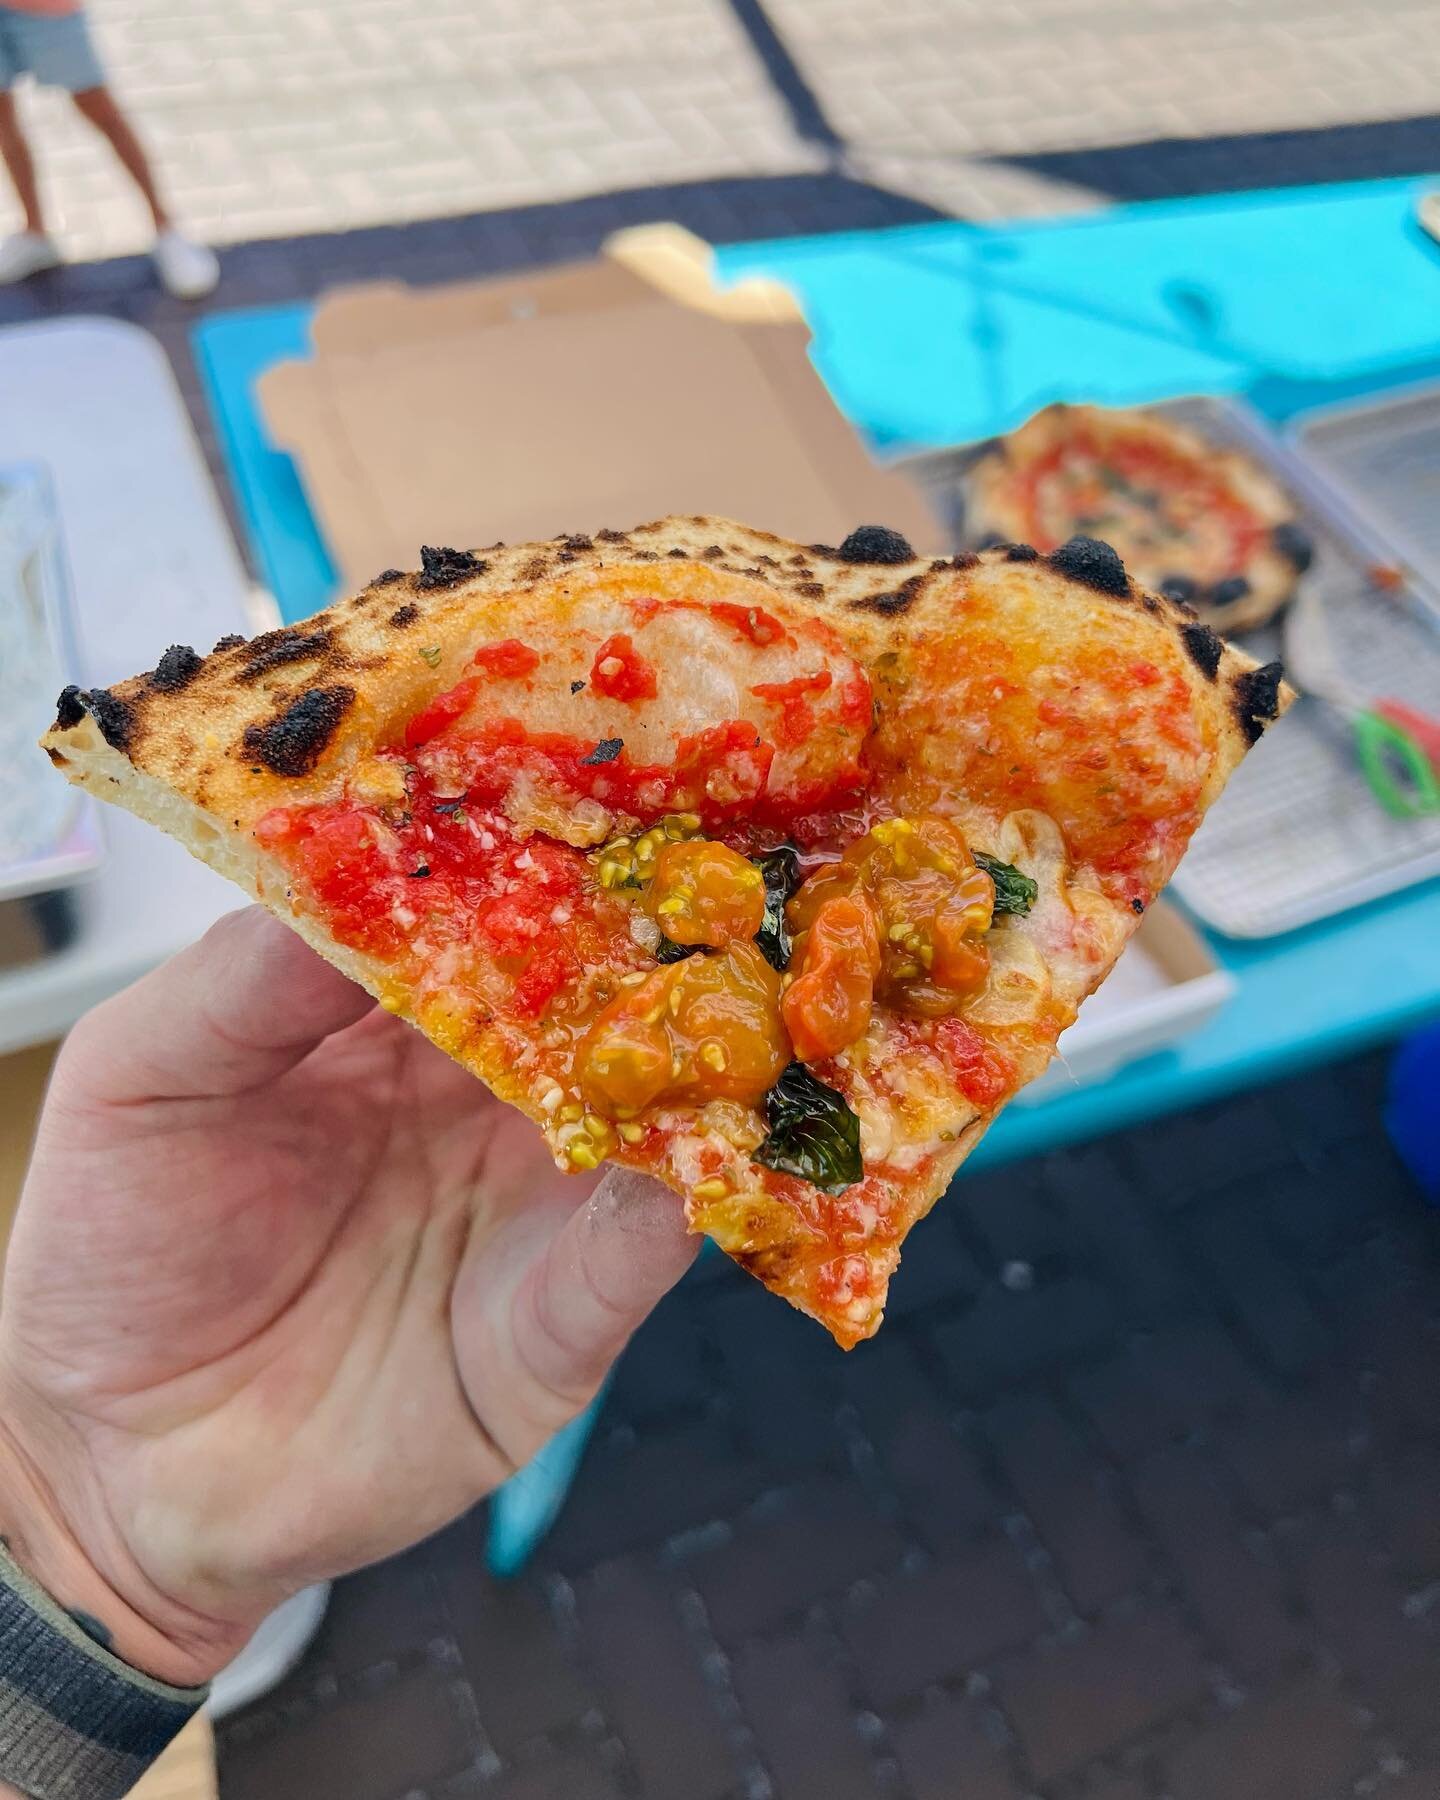 Had so much fun making pizzas during Tomato Art Fest! A big thank you to @hseanbrock and the whole @eatjoyland team. 

I don&rsquo;t take for granted how lucky I am to collaborate with some super talented friends.￼ Hope we can do it again together so